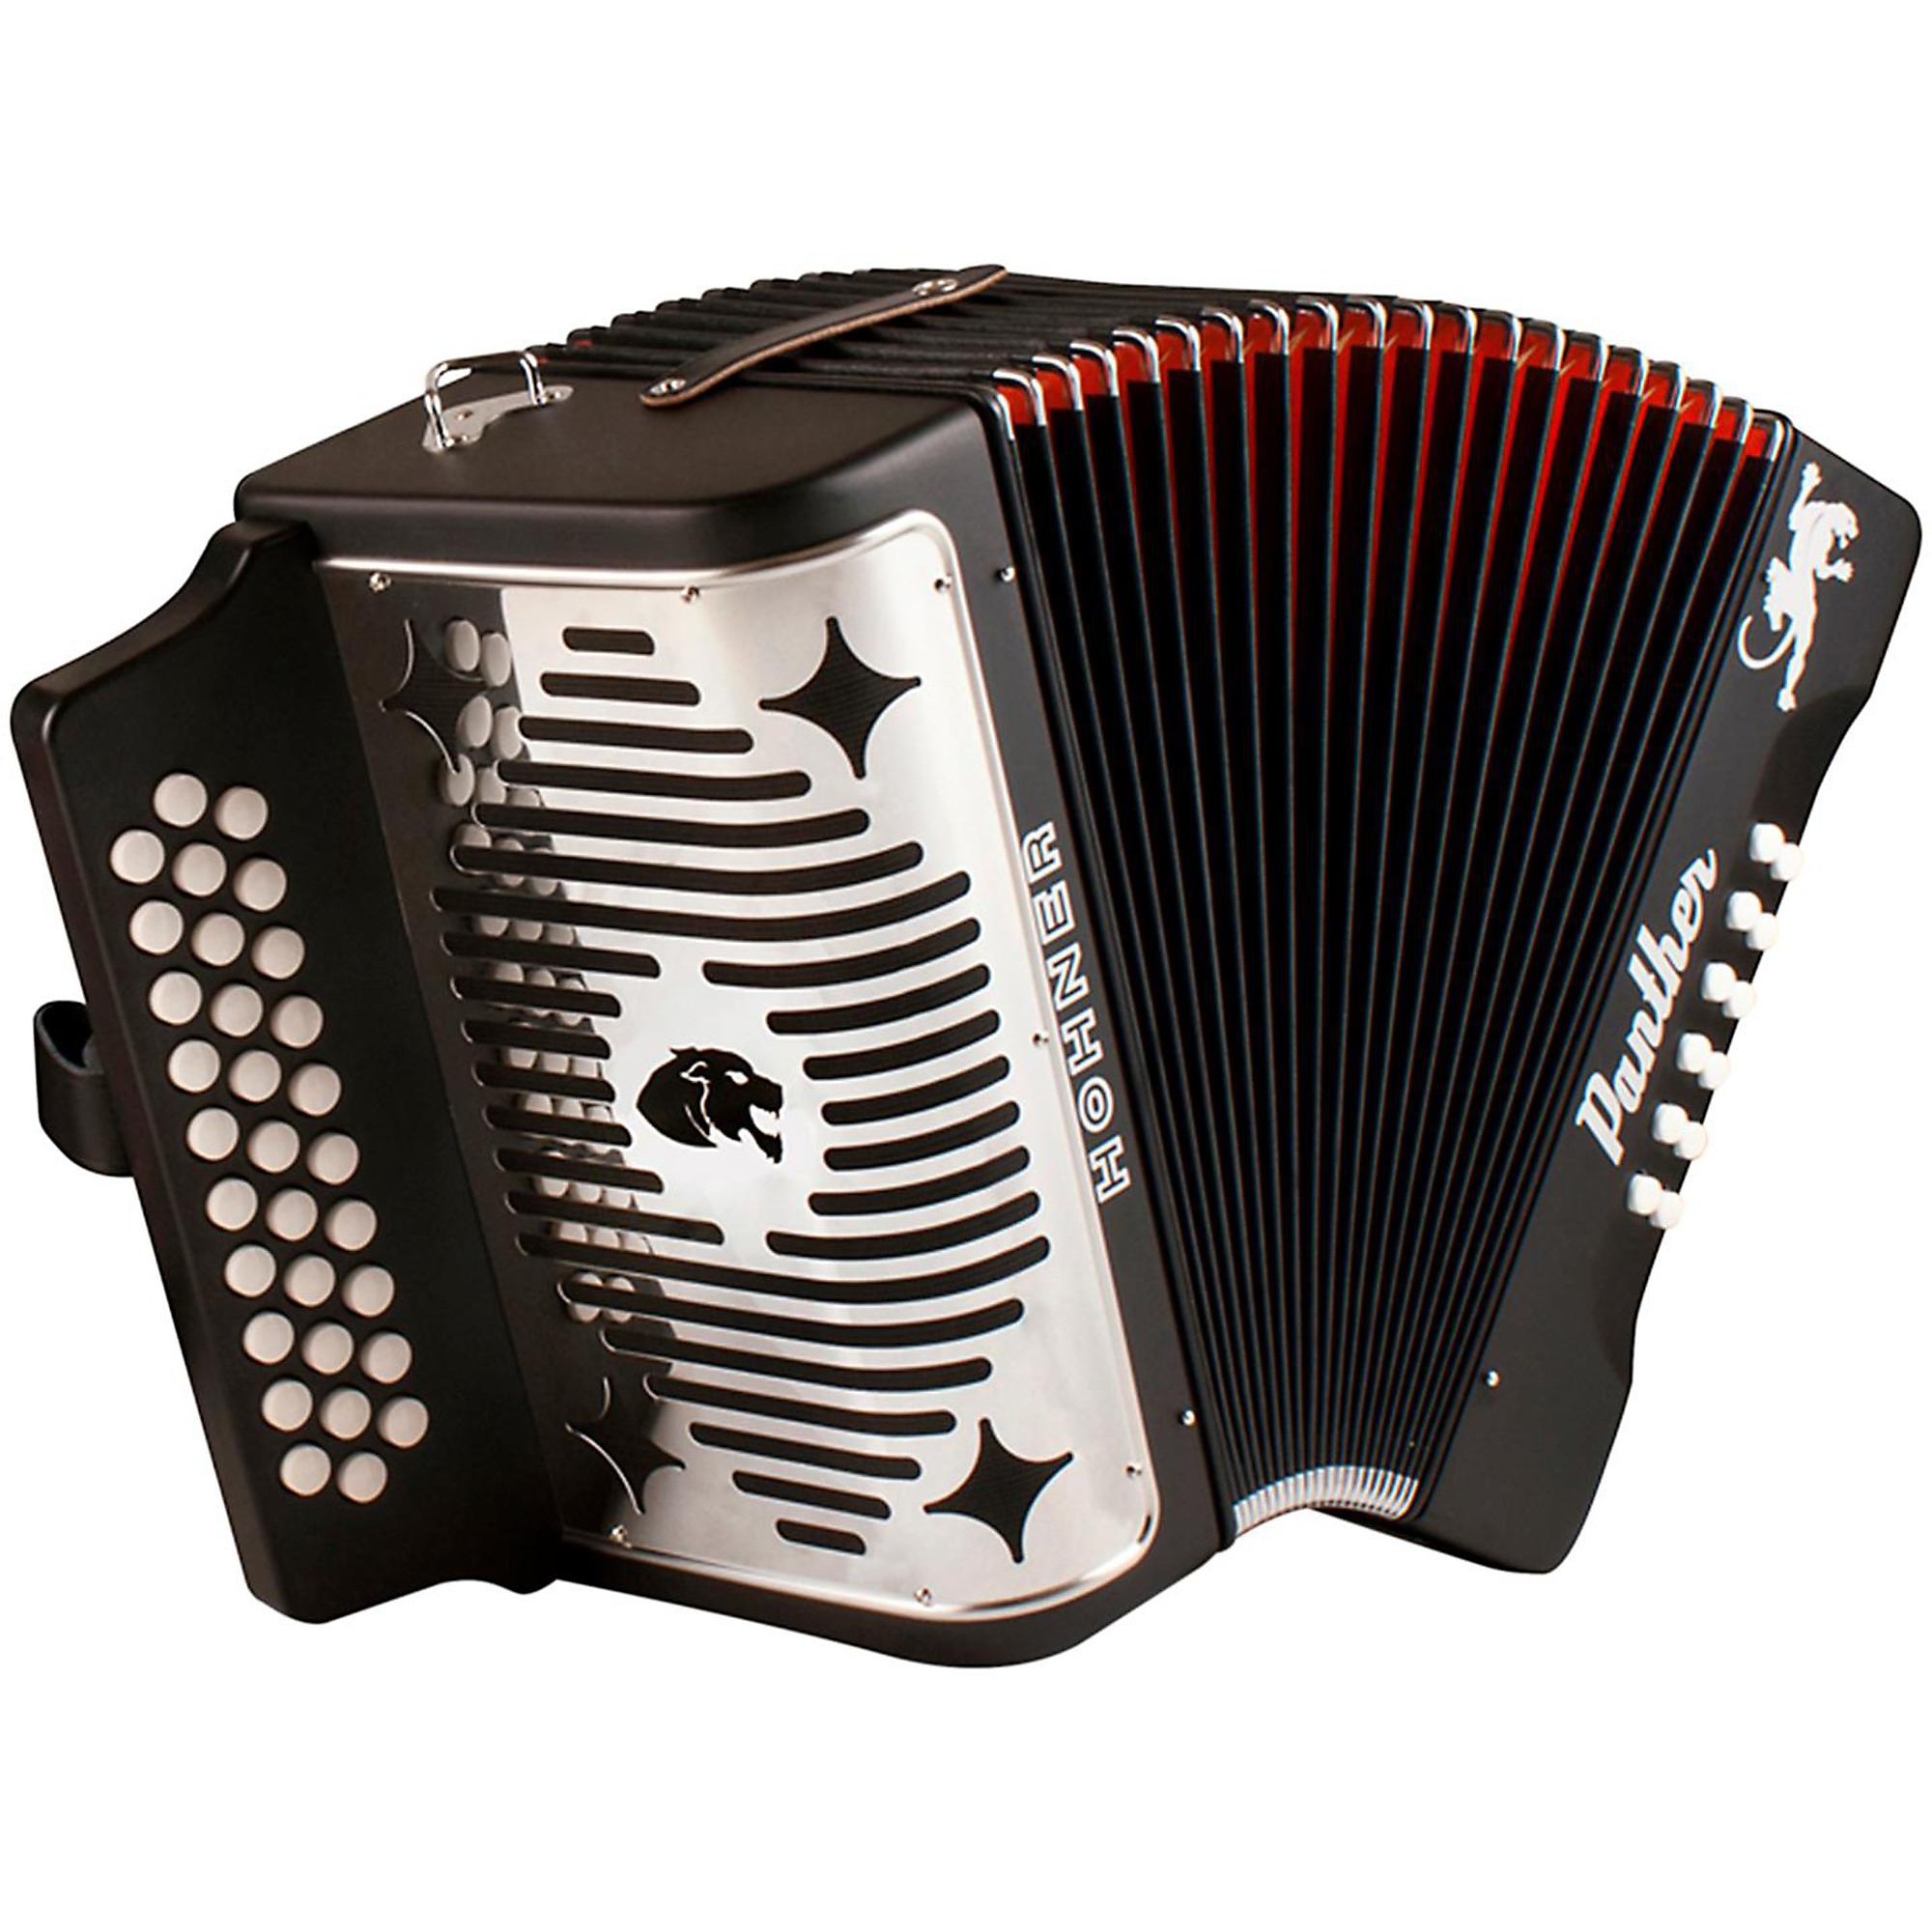 Professional Concertina Red 20 Buttons Accordion with Strap and Carrying Bag Beginner Musical Instrument for Daily Practice Stage Performance 